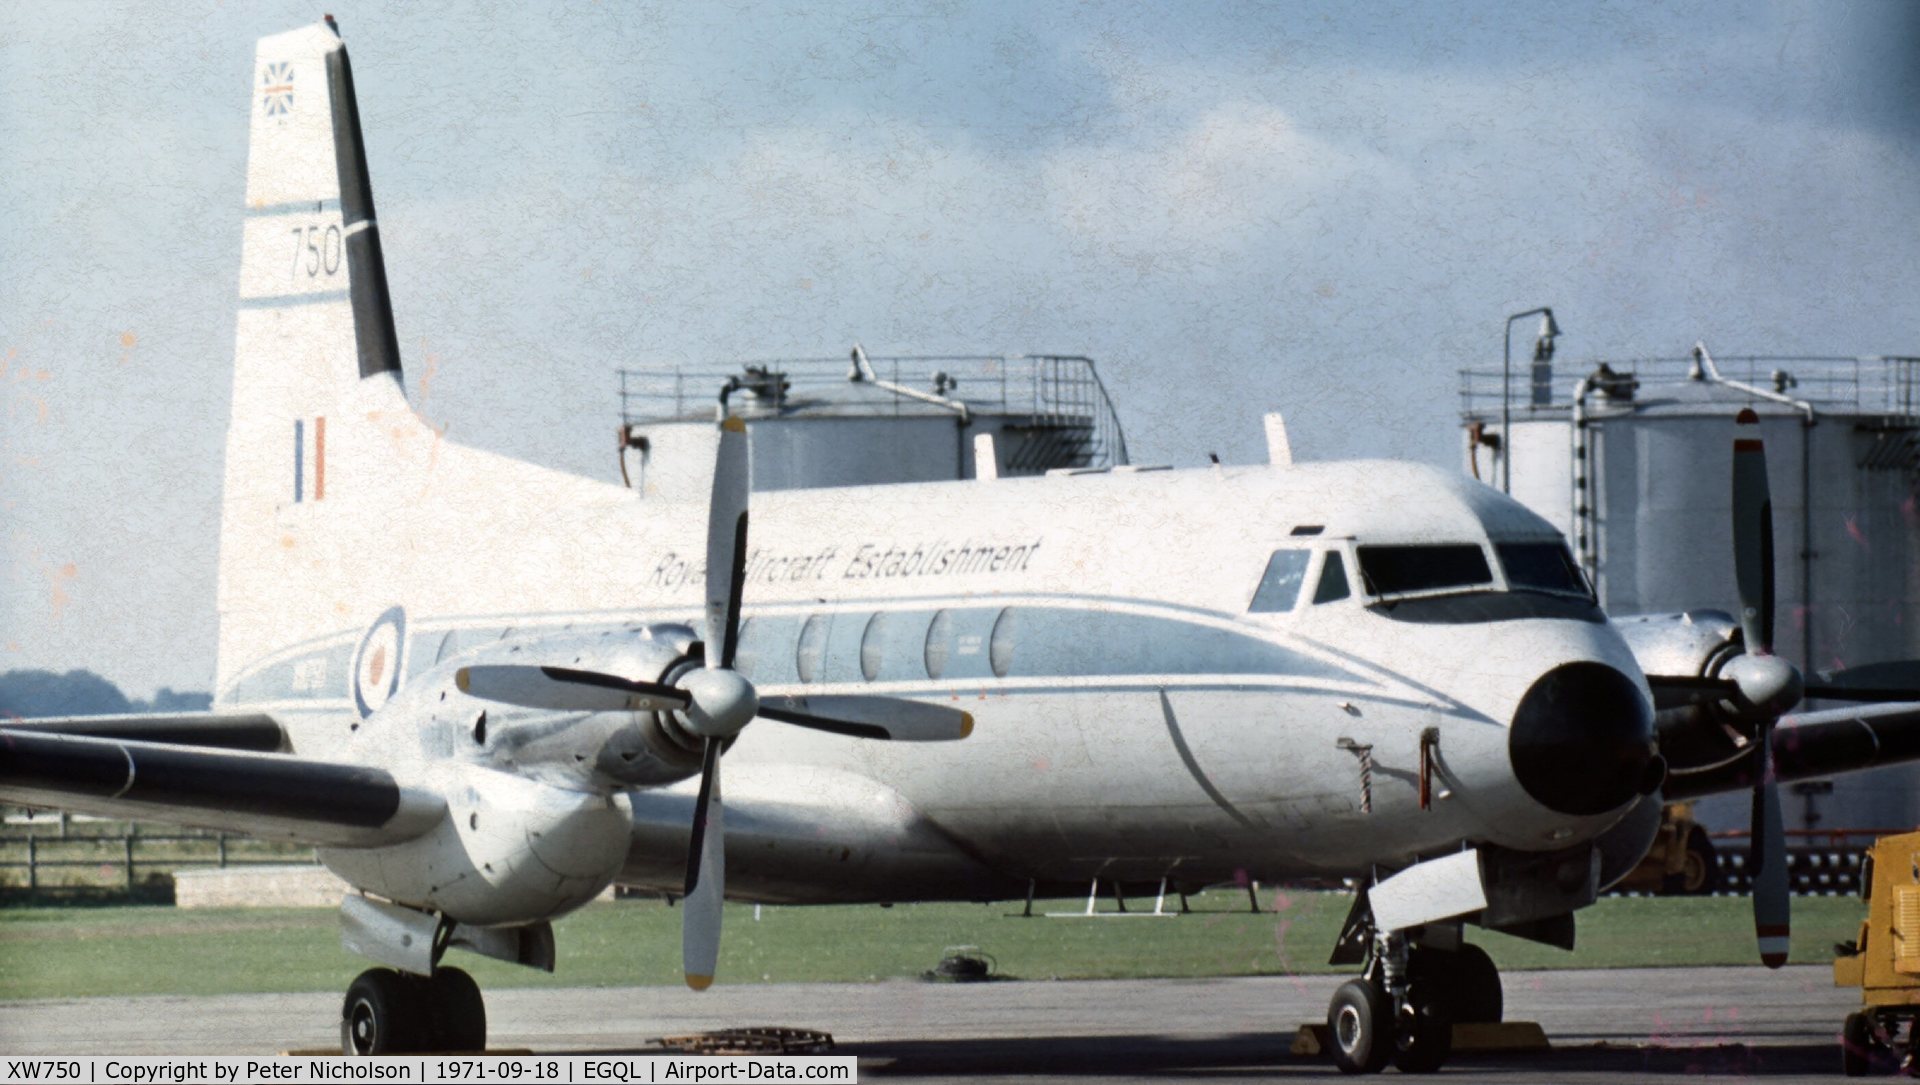 XW750, 1963 Avro 748 Series 1 C/N 1559, HS.748 Series 107 of the Royal Aircraft Establishment at Farnborough attended the 1971 Leuchars Airshow.